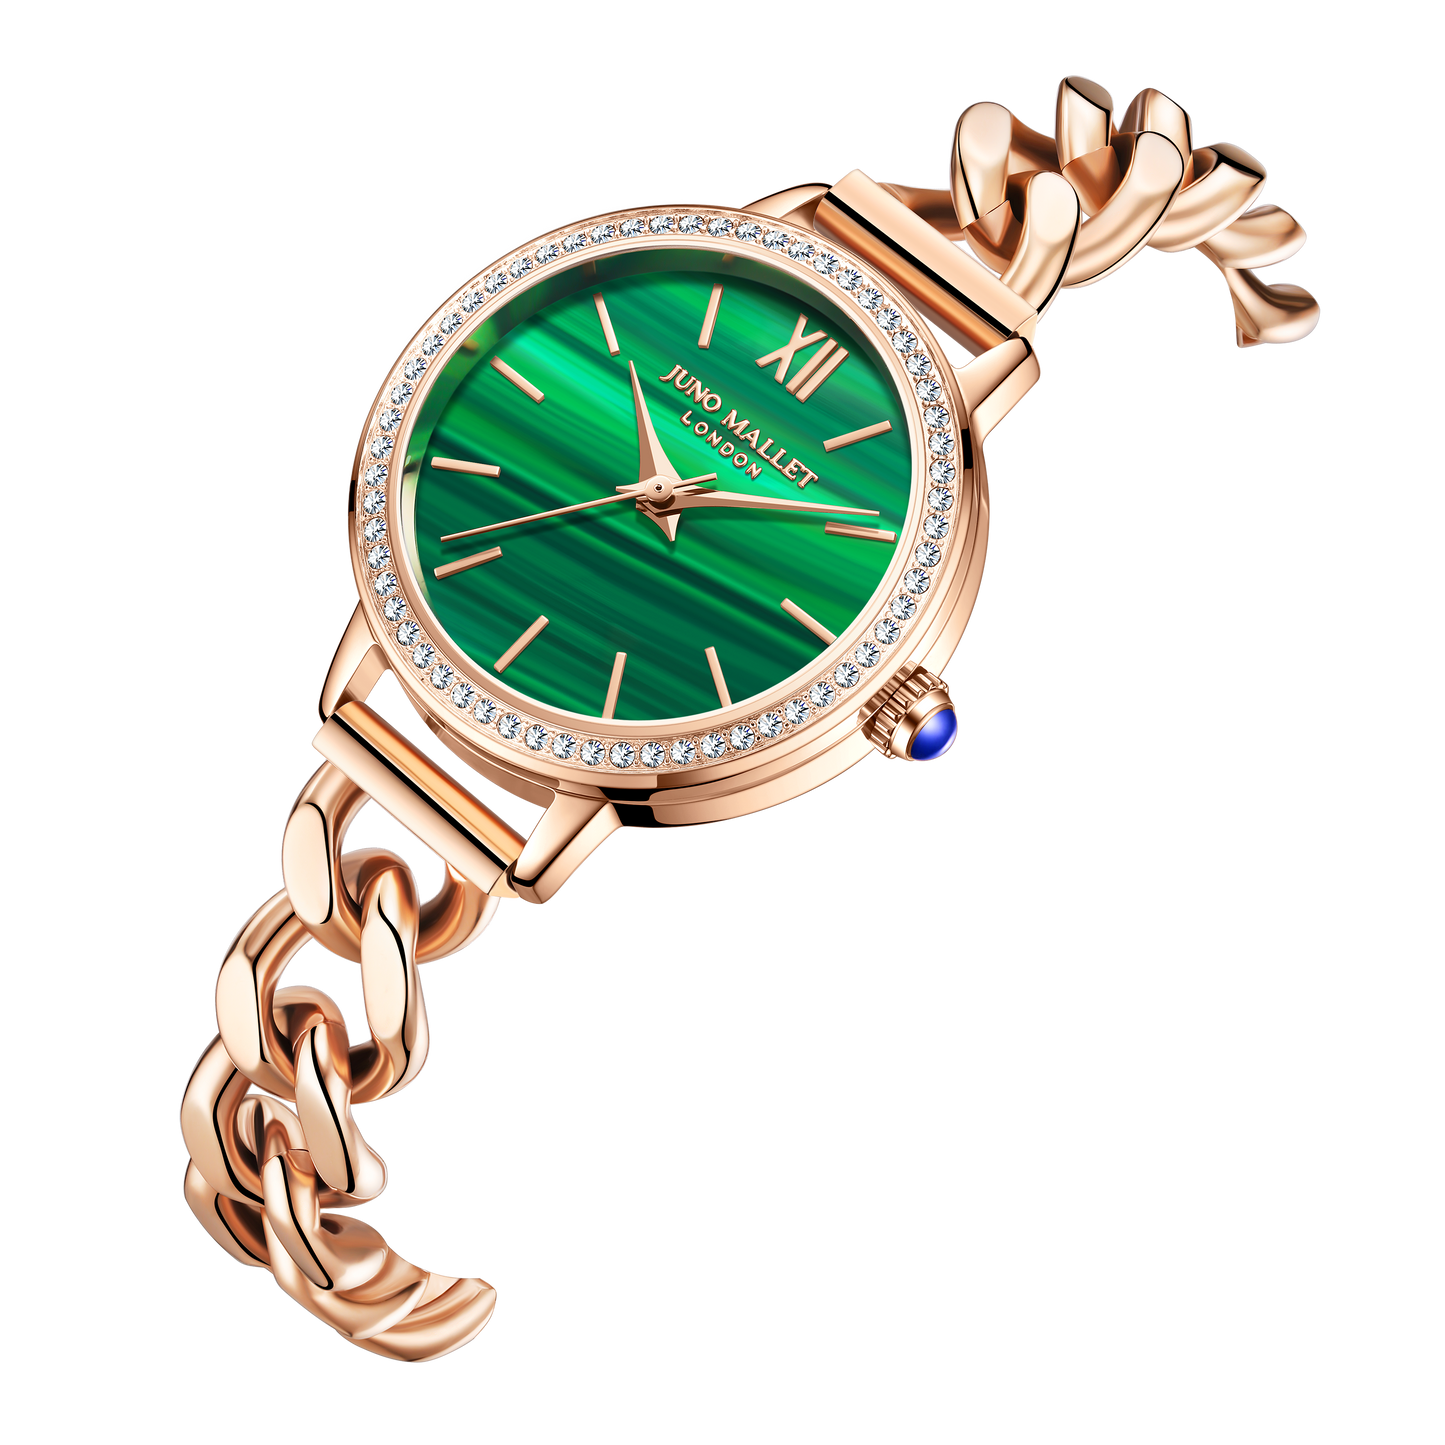 Mermaid Pearl Watch with her 2nd Dial the Vintage Malachite "Face" | Romantic Luxury Package | Gifts for Her